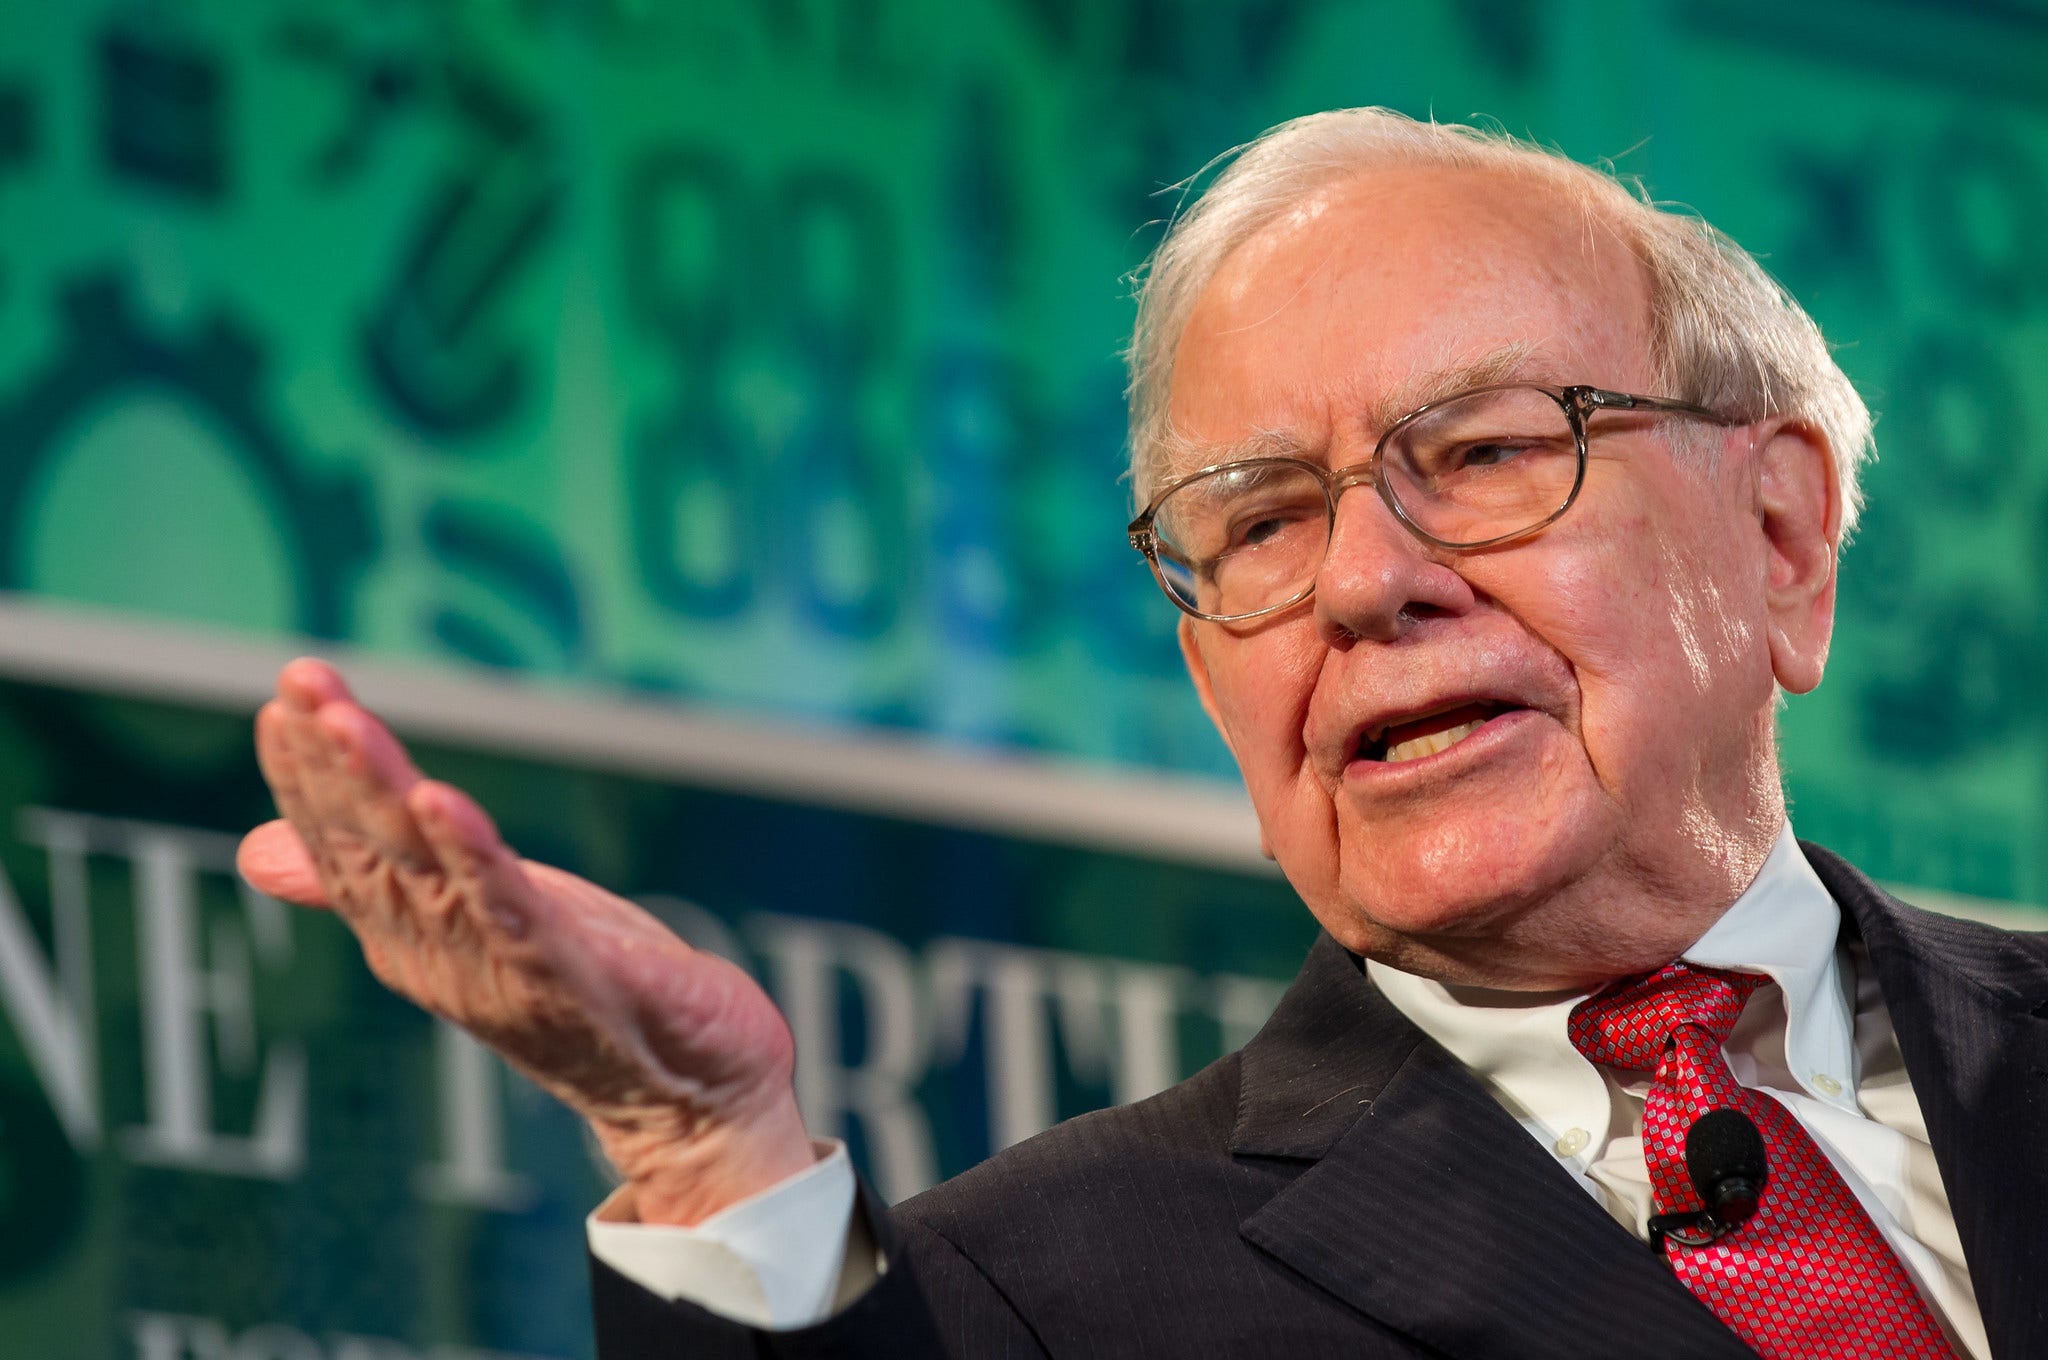 Want To Invest Like Warren Buffett? All The Moves The Billionaire Made Last Quarter